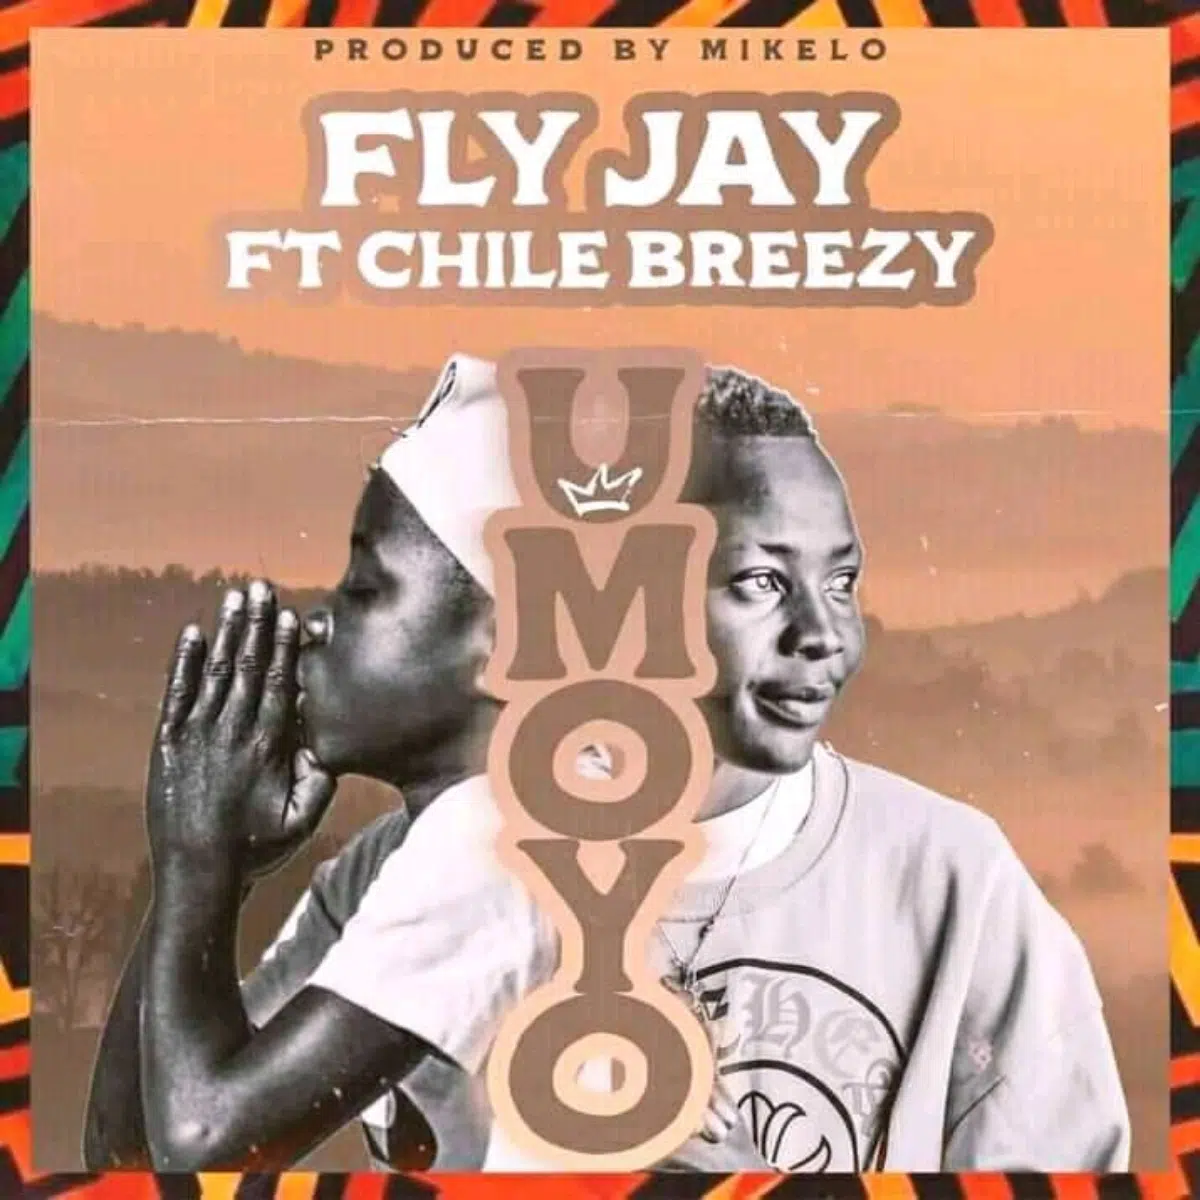 DOWNLOAD: Fly Jay Feat Chile Breezy – “Umoyo” Mp3